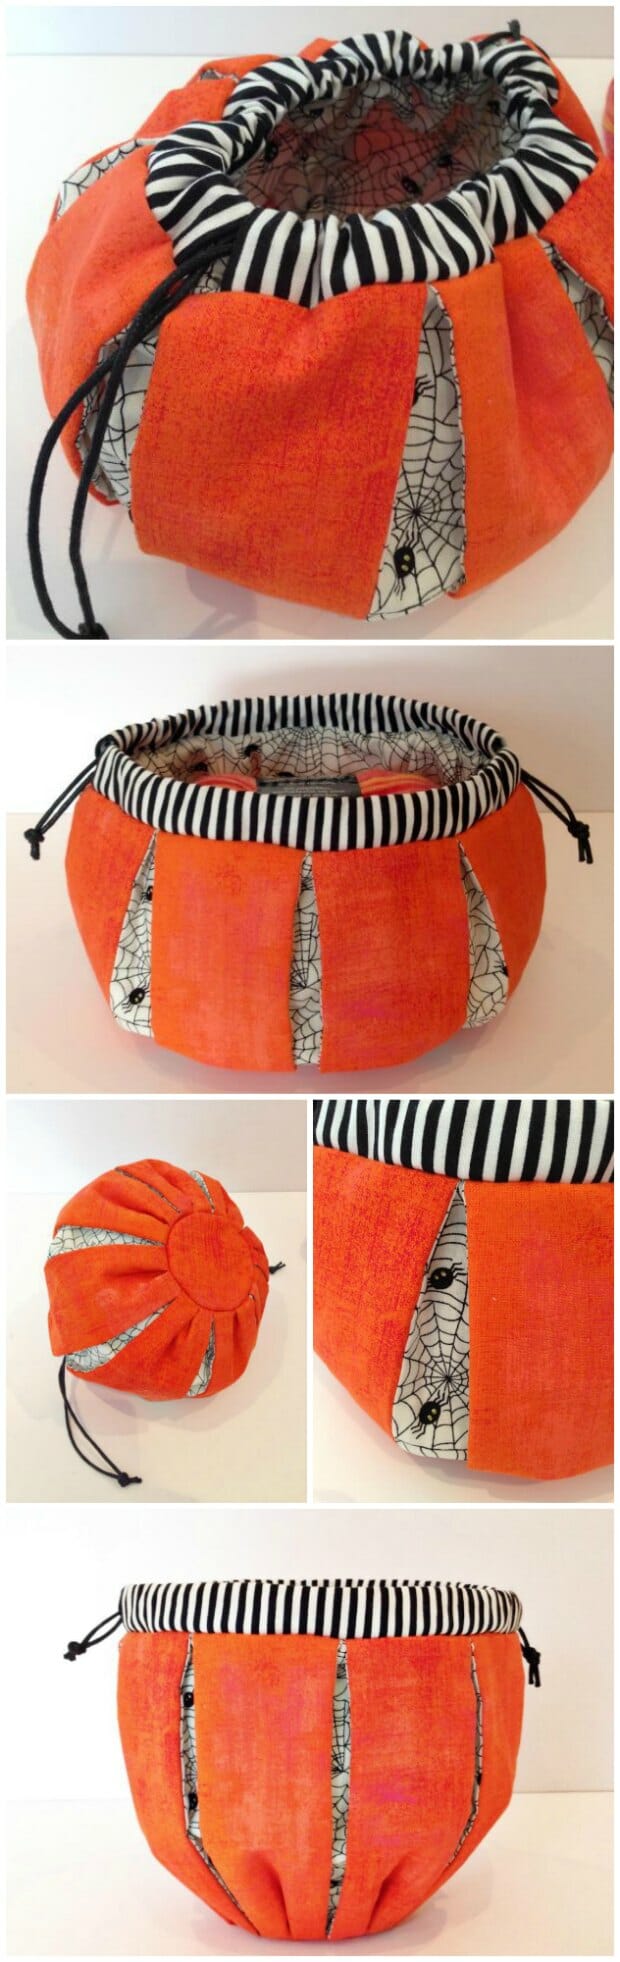 Sewing pattern for a drawstring Halloween Pumpkin treat bag. My grandkids are going to love these, but with other fabrics, these would make good gift bags too. Christmas is coming!